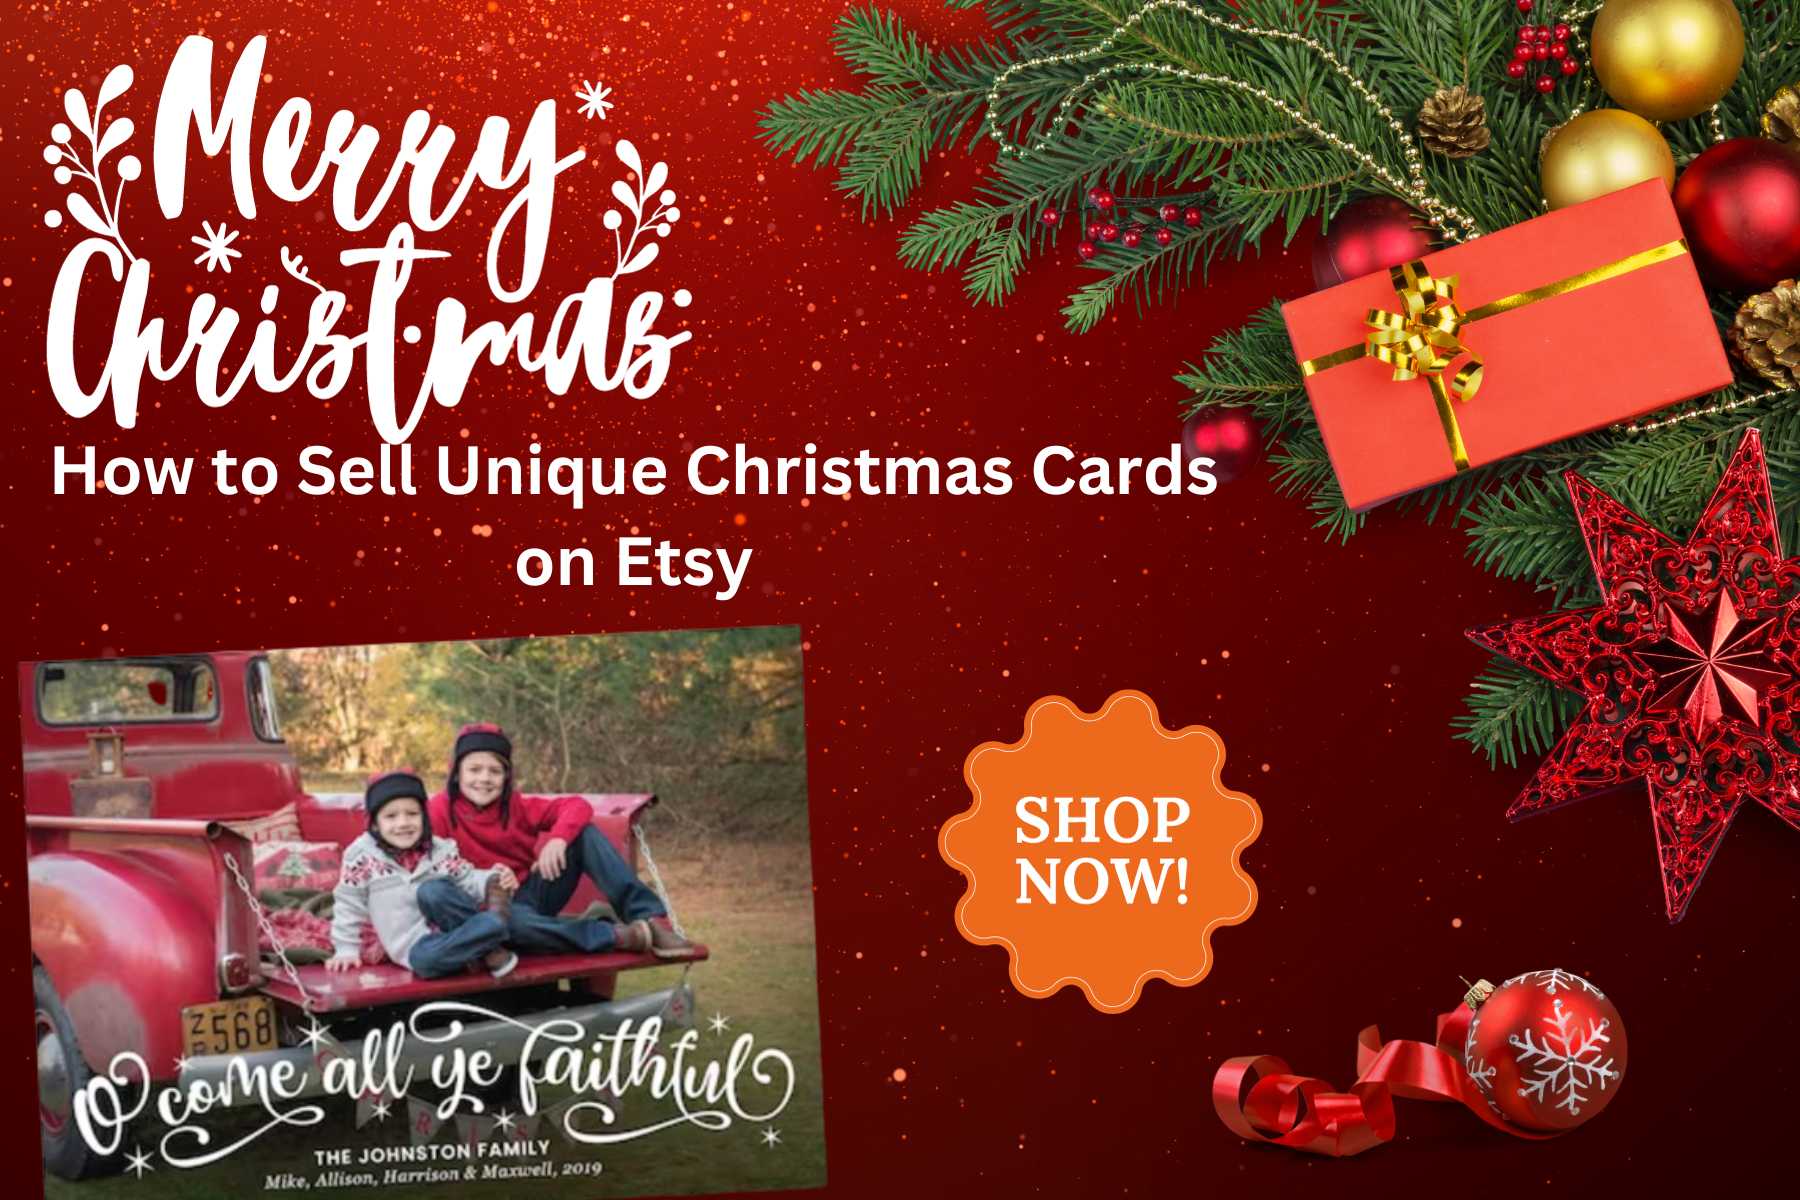 How to Sell Unique Christmas Cards on Etsy